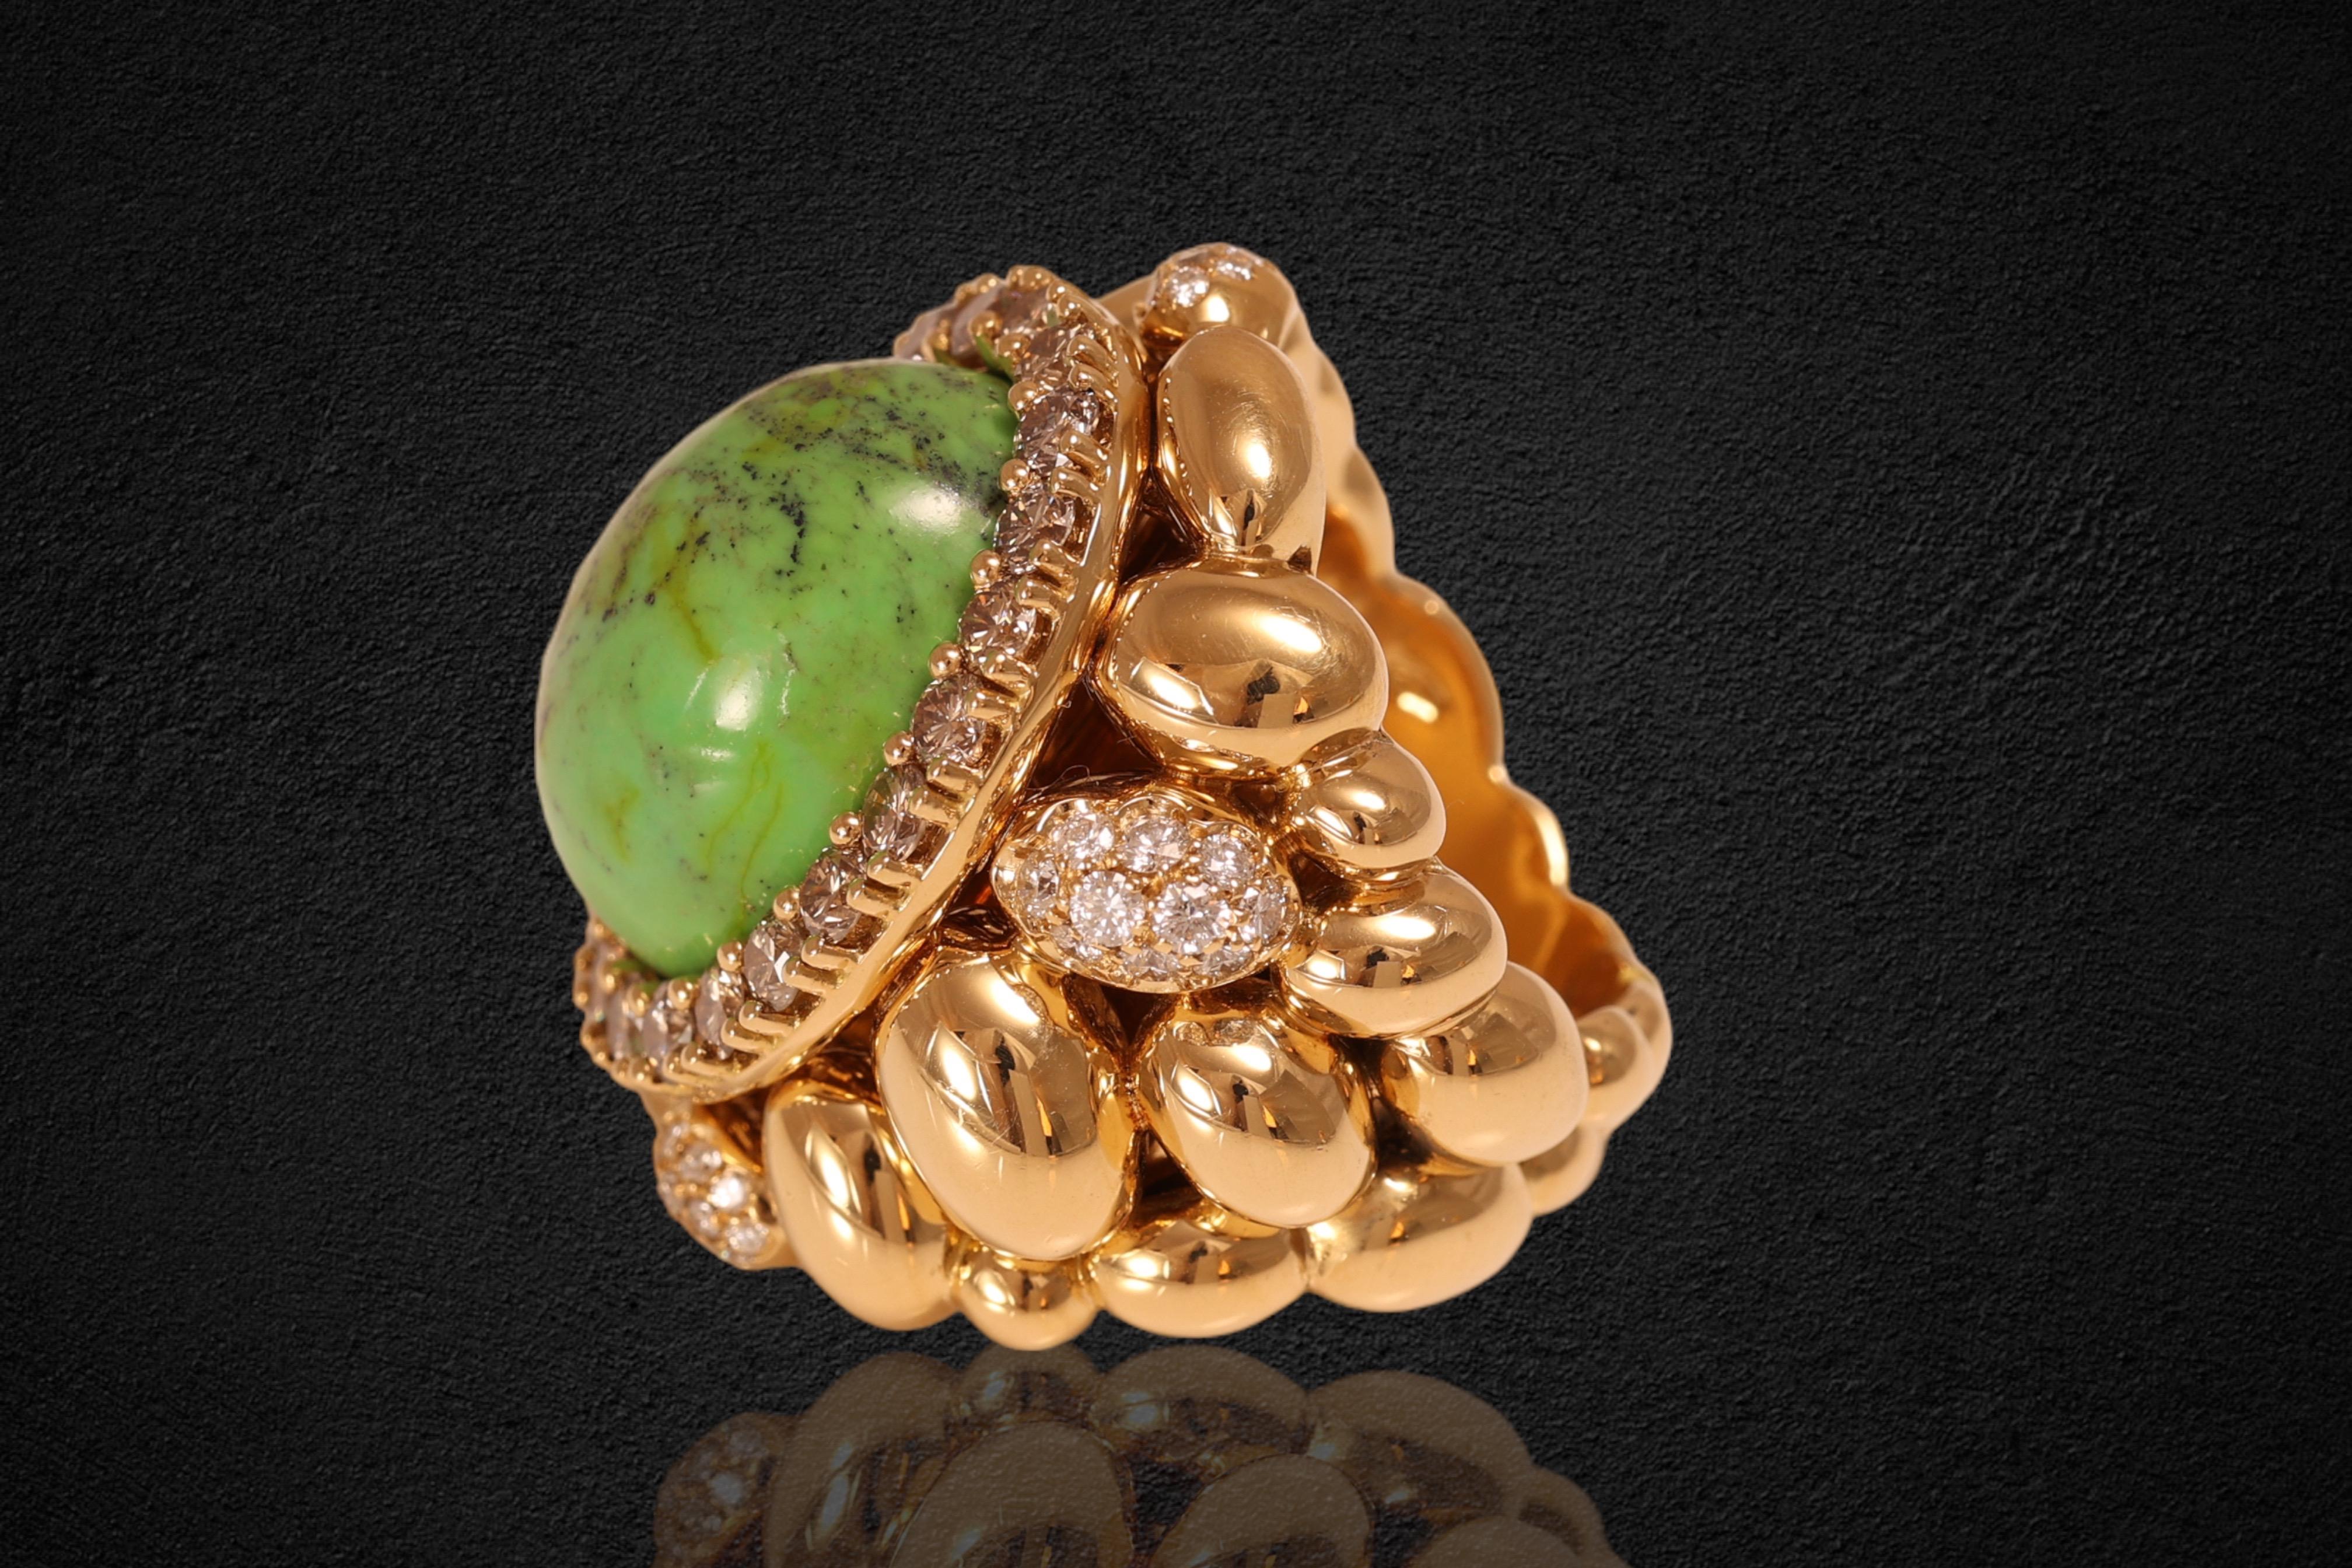 18kt Yellow Gold Clustered Mattioli Ring, with Big Green Stone & 3.2ct Diamonds 2